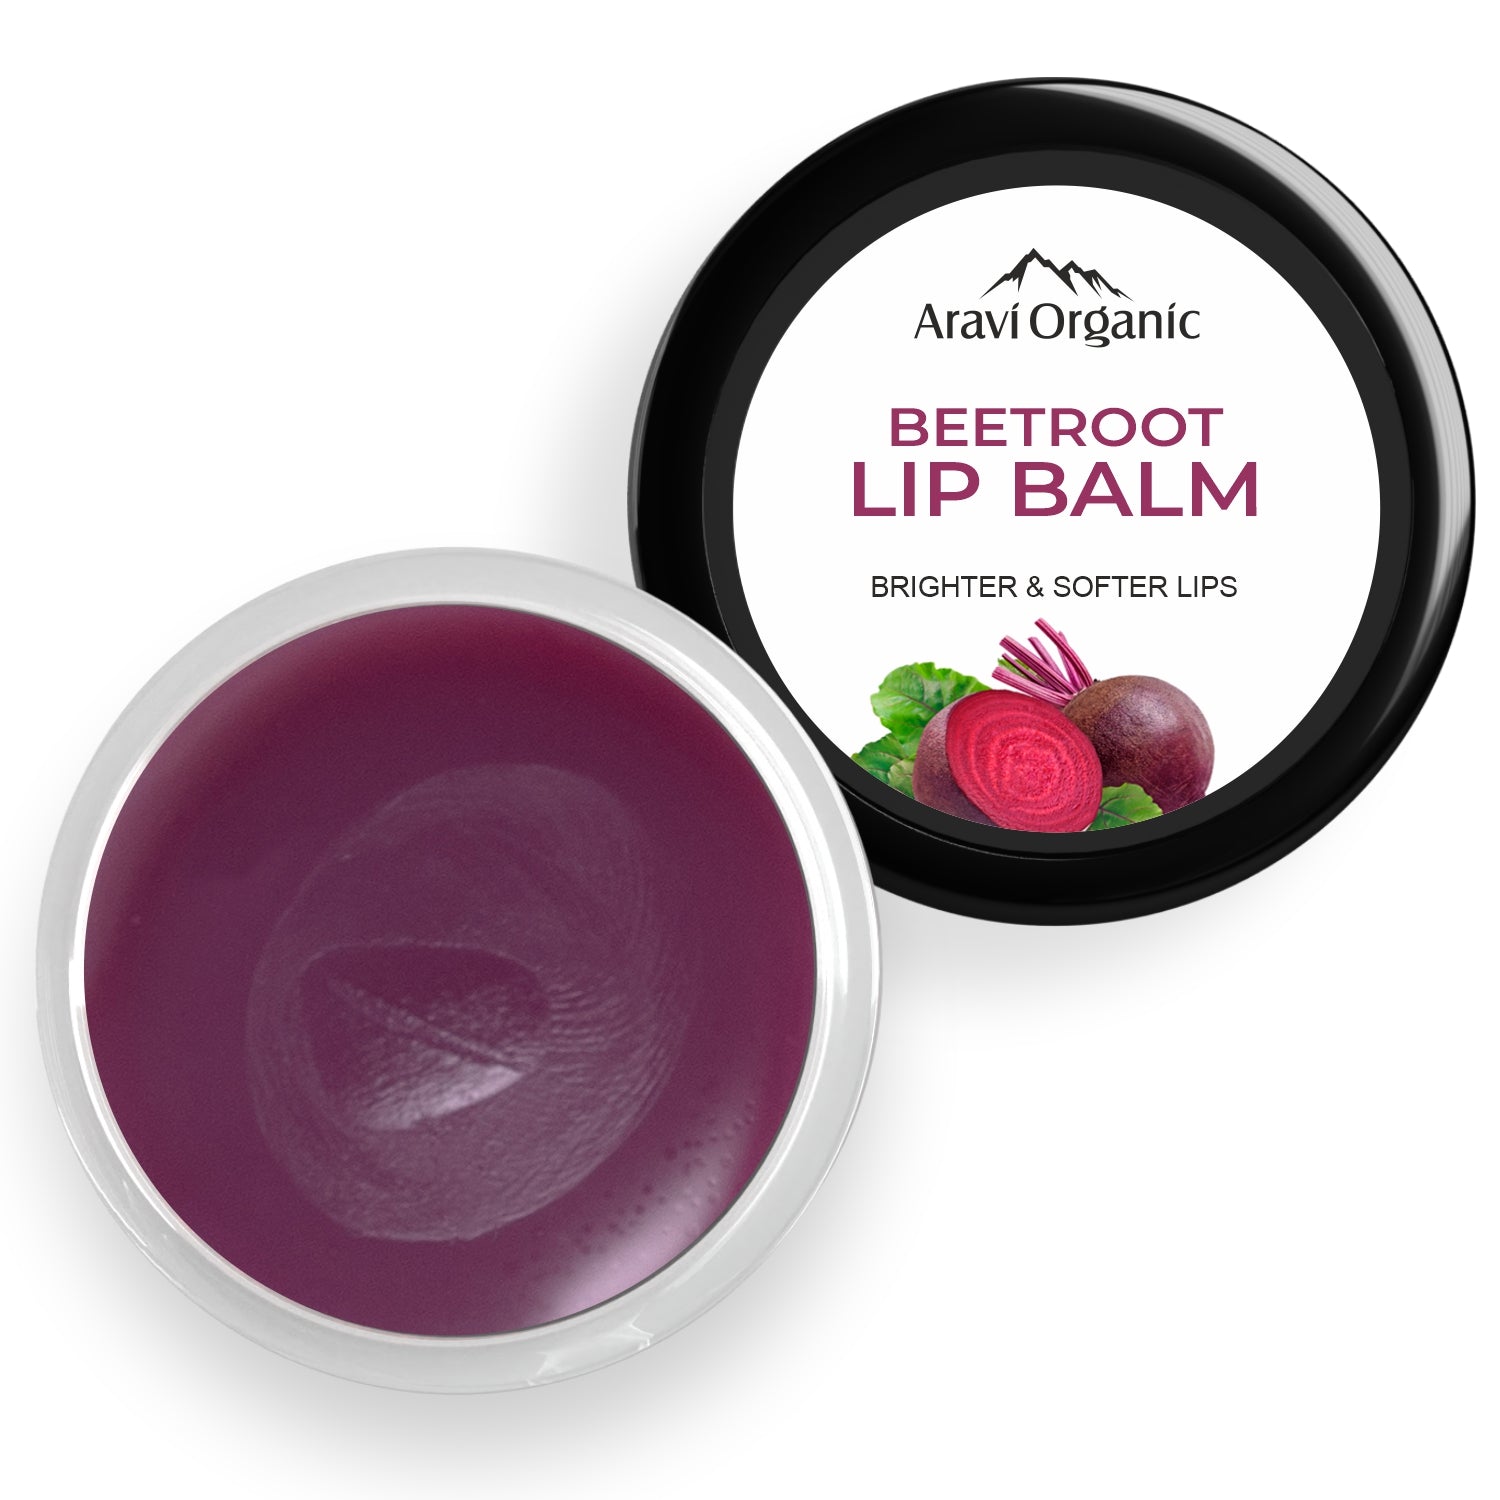 Beetroot Lip Balm For Lip Lightening, Dry & Chapped Lips -For Soft & Glossy Lips Beetroots